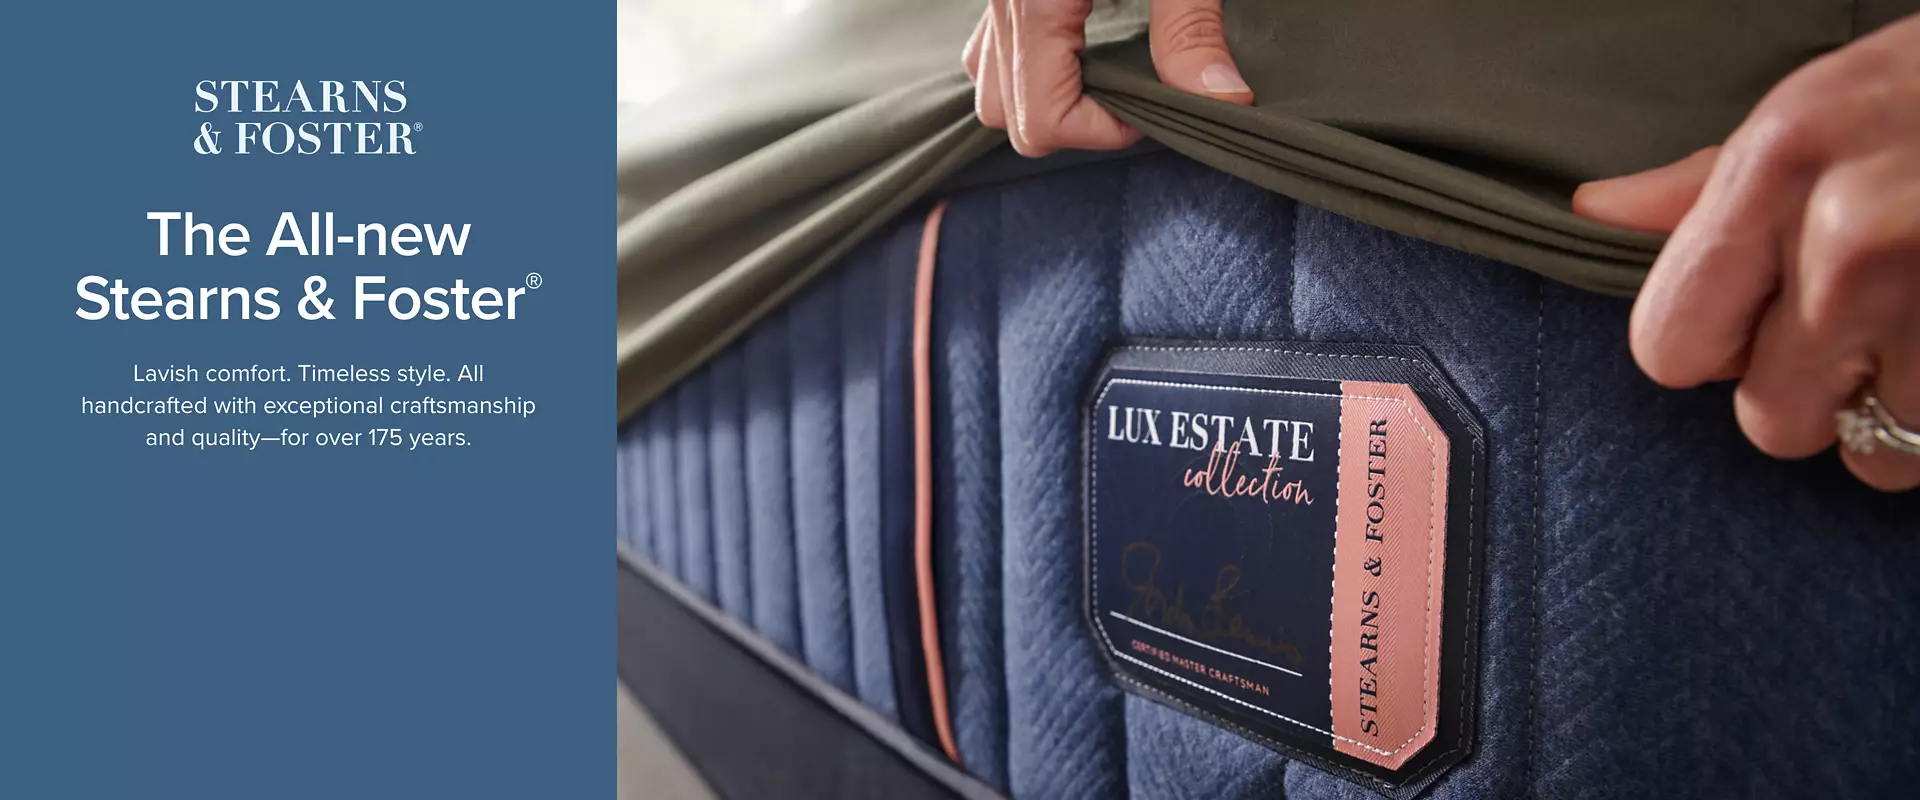 The all new Stearns and Foster Mattresses - lavish comfort. Timeless style. All handcrafted with exceptional craftsmanship and quality - for over 175 years. - Shop Now